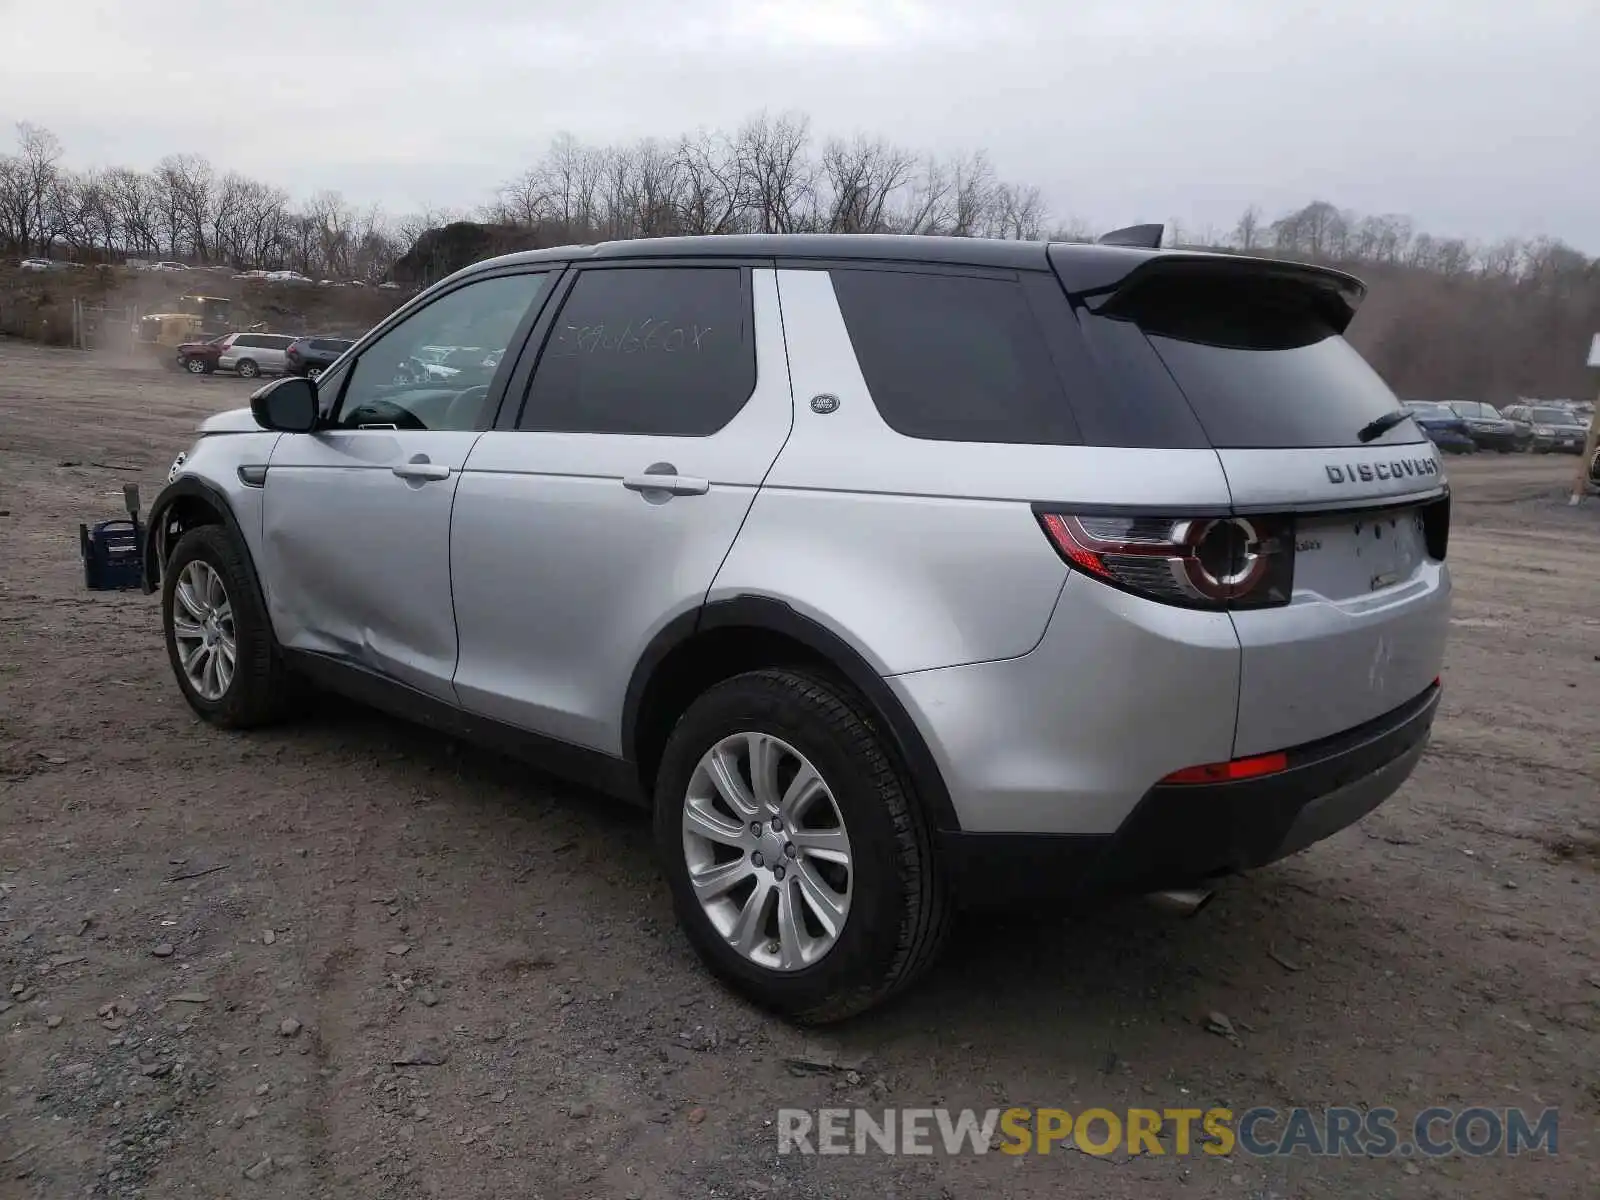 3 Photograph of a damaged car SALCP2FX9KH828733 LAND ROVER DISCOVERY 2019